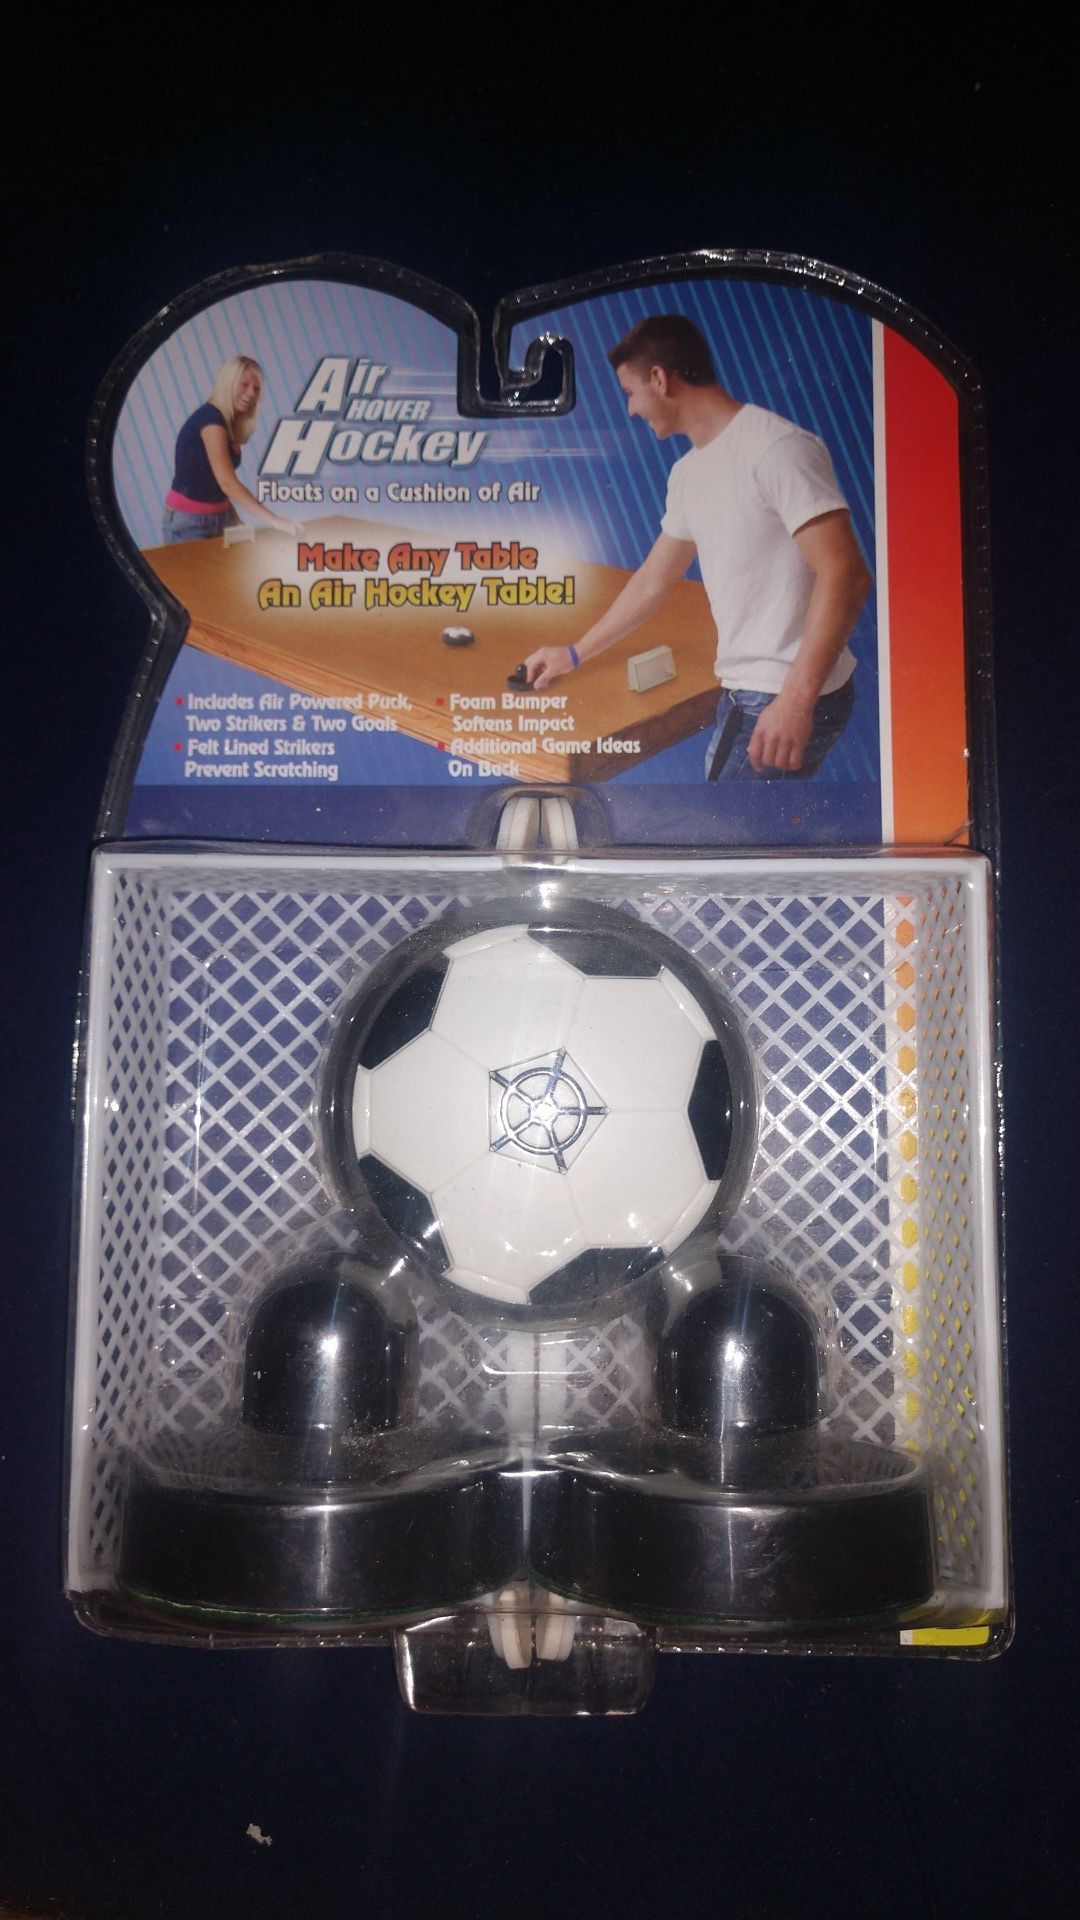 Air hover hockey, floats on cushion of air, make any table a air hockey table brand new sealed in package